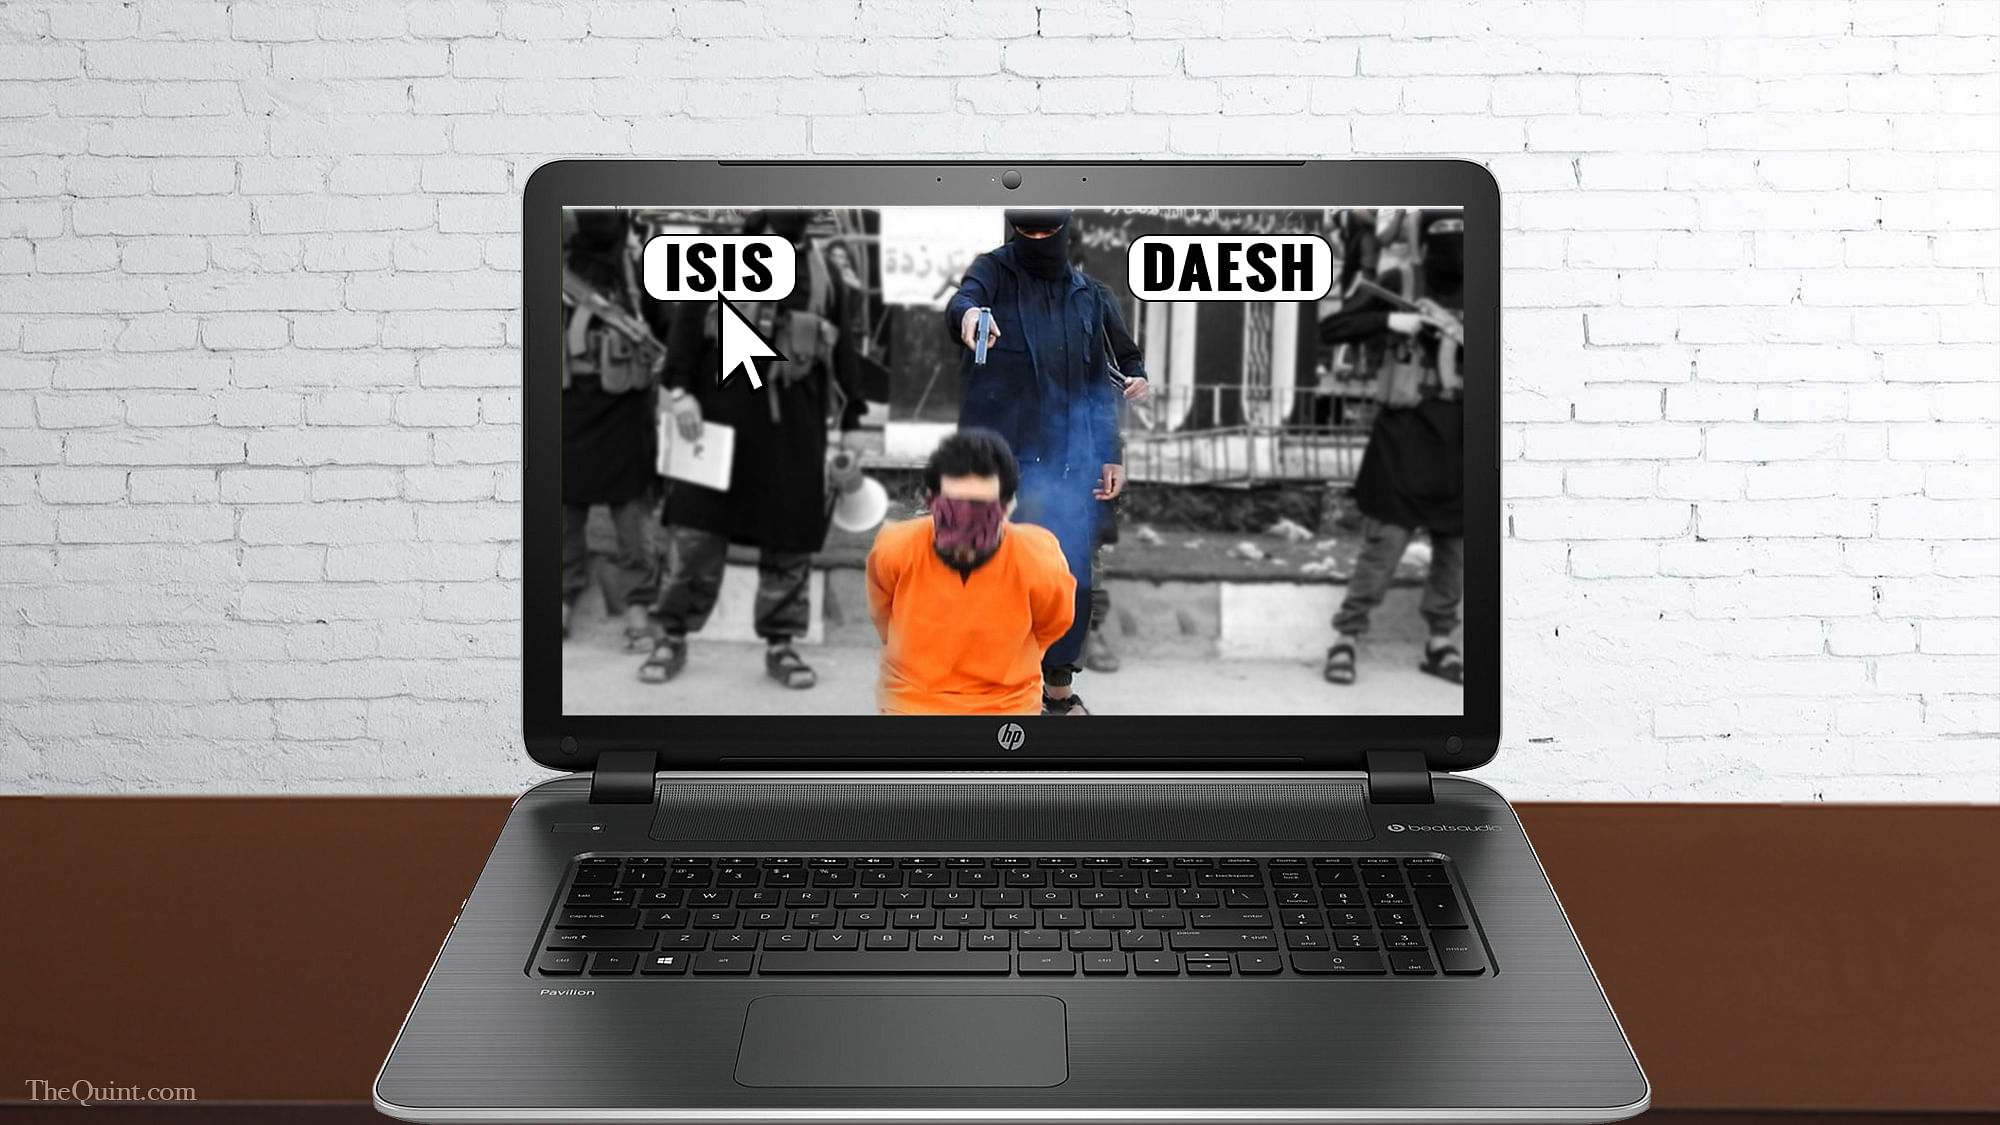 Rukmini Callimachi, a journalist with The New York Times and an expert on ISIS, however, argues that ISIS does not arbitrarily claim any attack. (Photo: ISIS Propaganda on Social Media/Altered by <b>The Quint</b>)